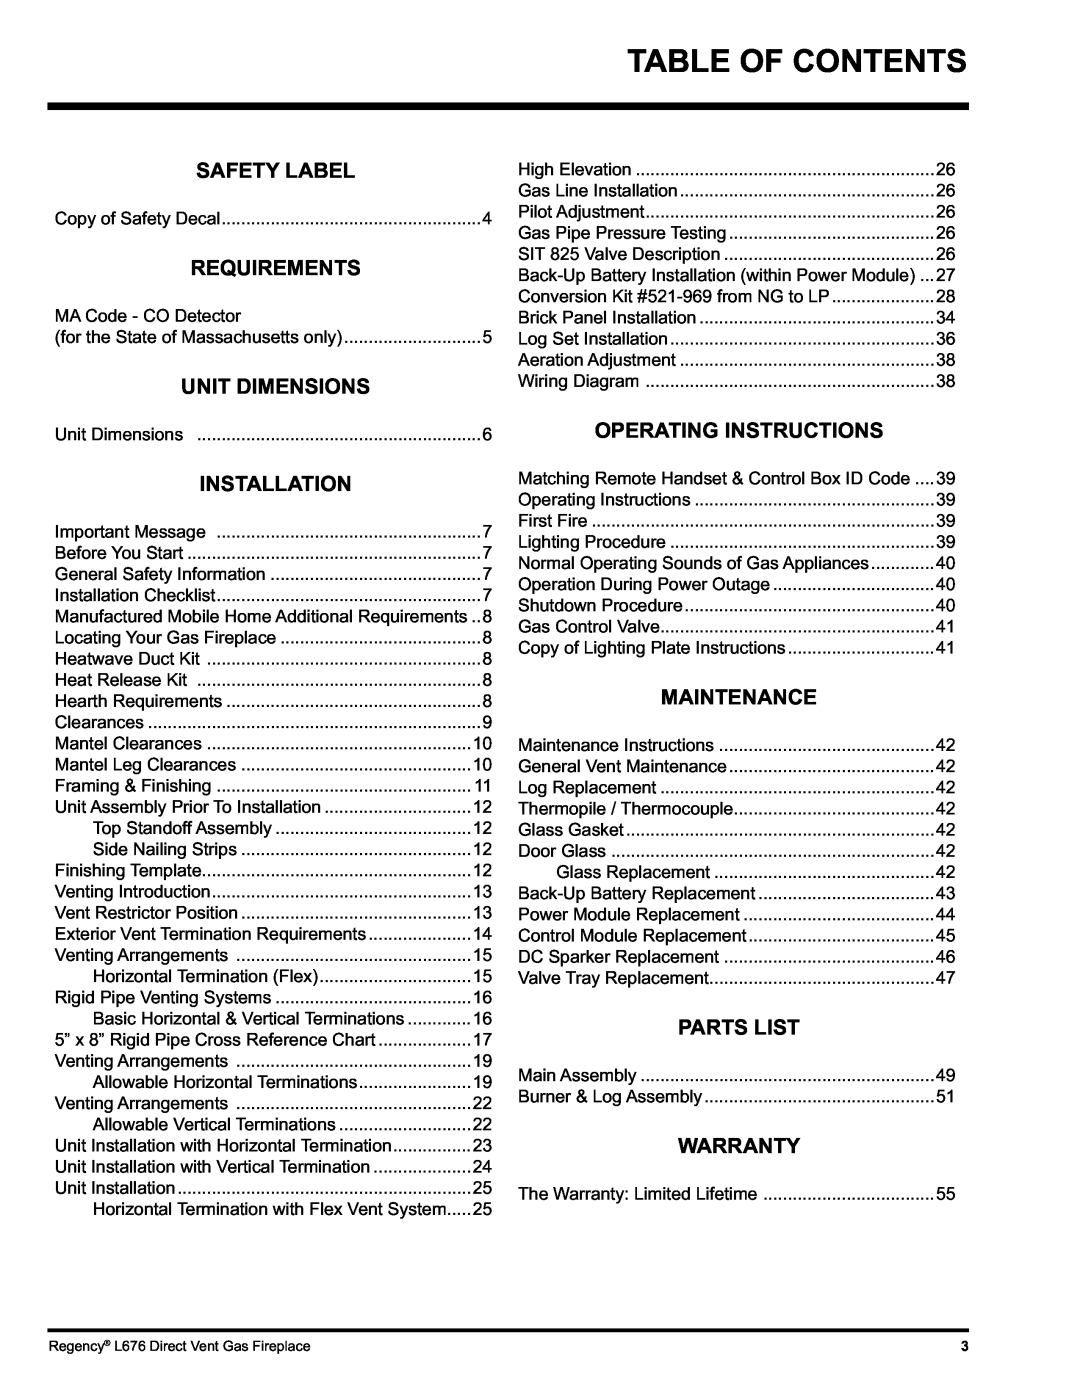 Regency L676 installation manual Table Of Contents, Safety Label, Warranty 